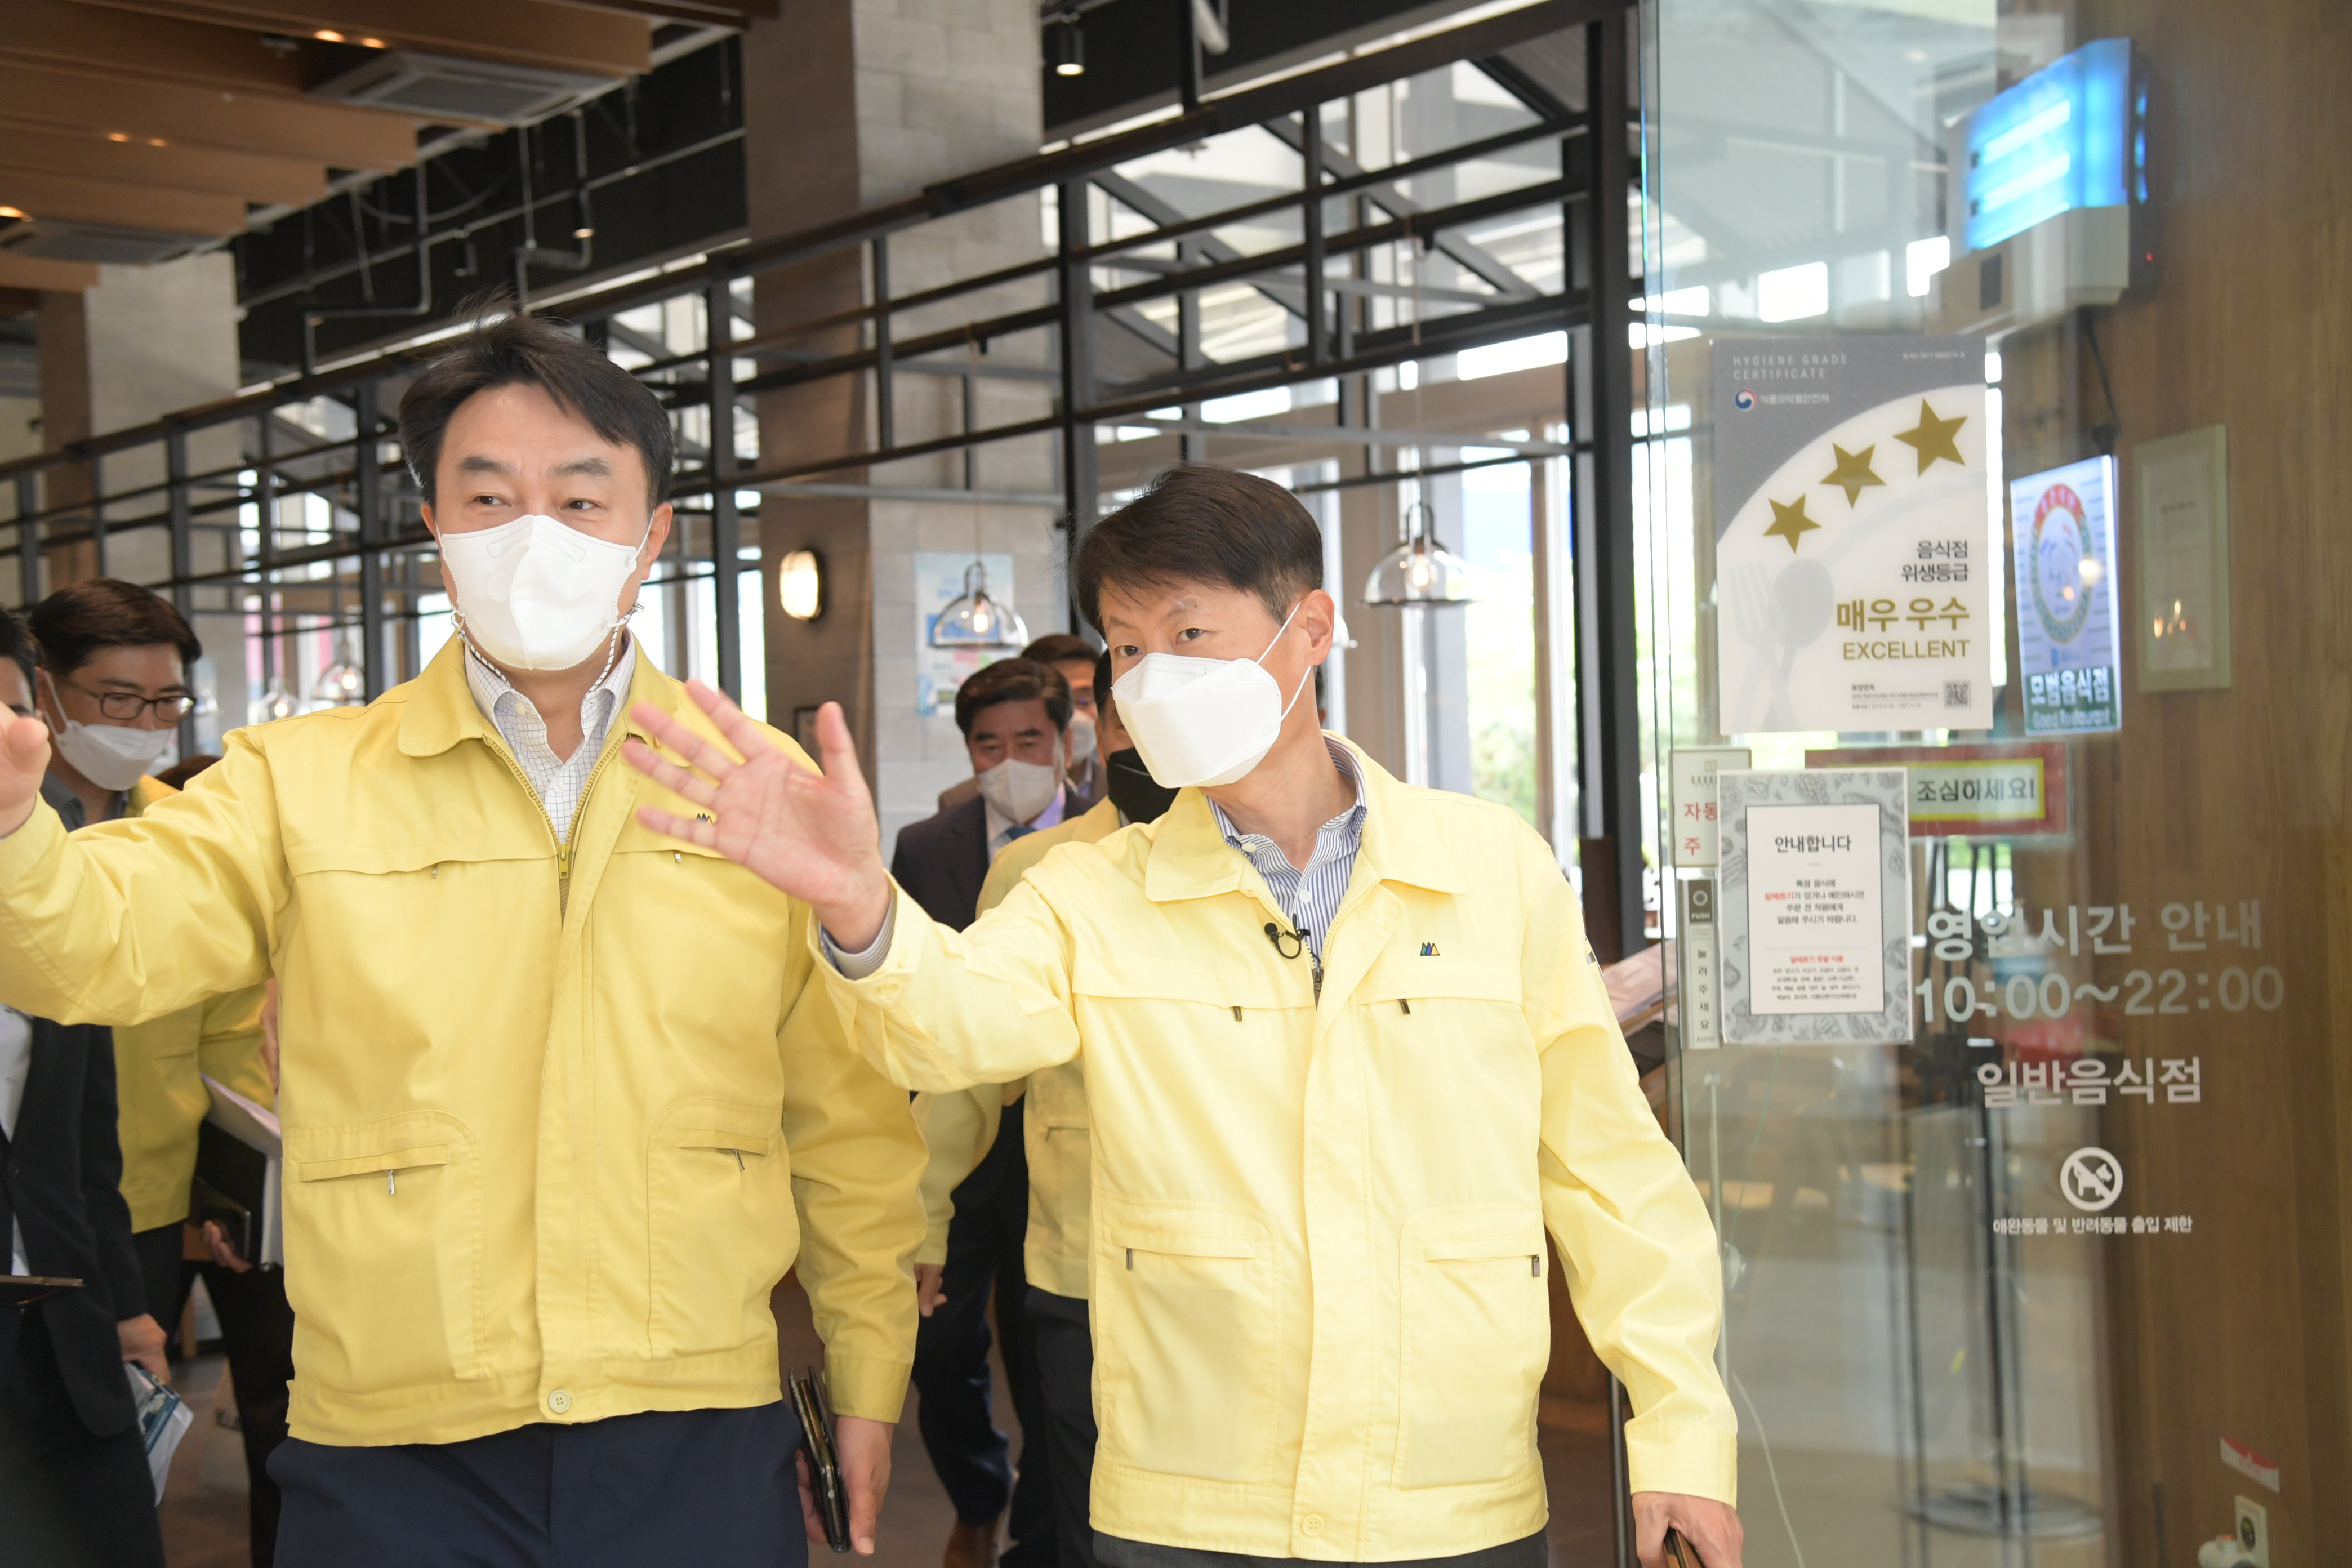 Photo News4 - [April 24, 2021] Minister inspects restaurants to check COVID-19 anti-epidemic measures